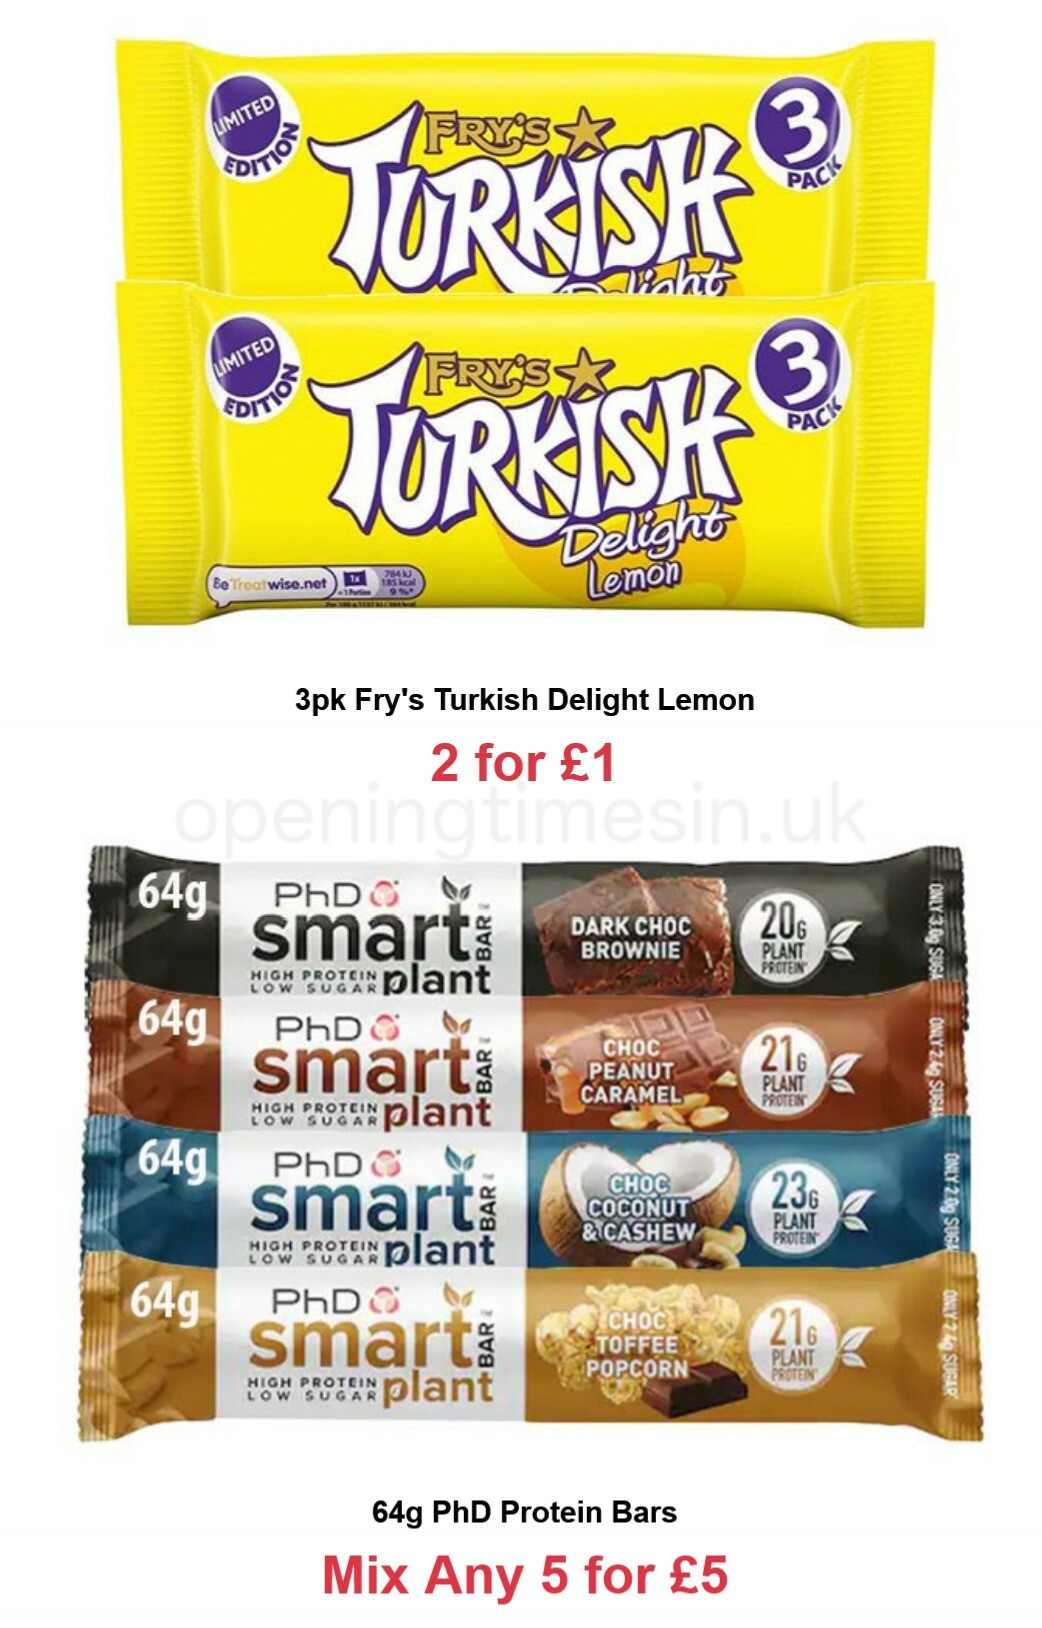 Farmfoods Offers from 20 April